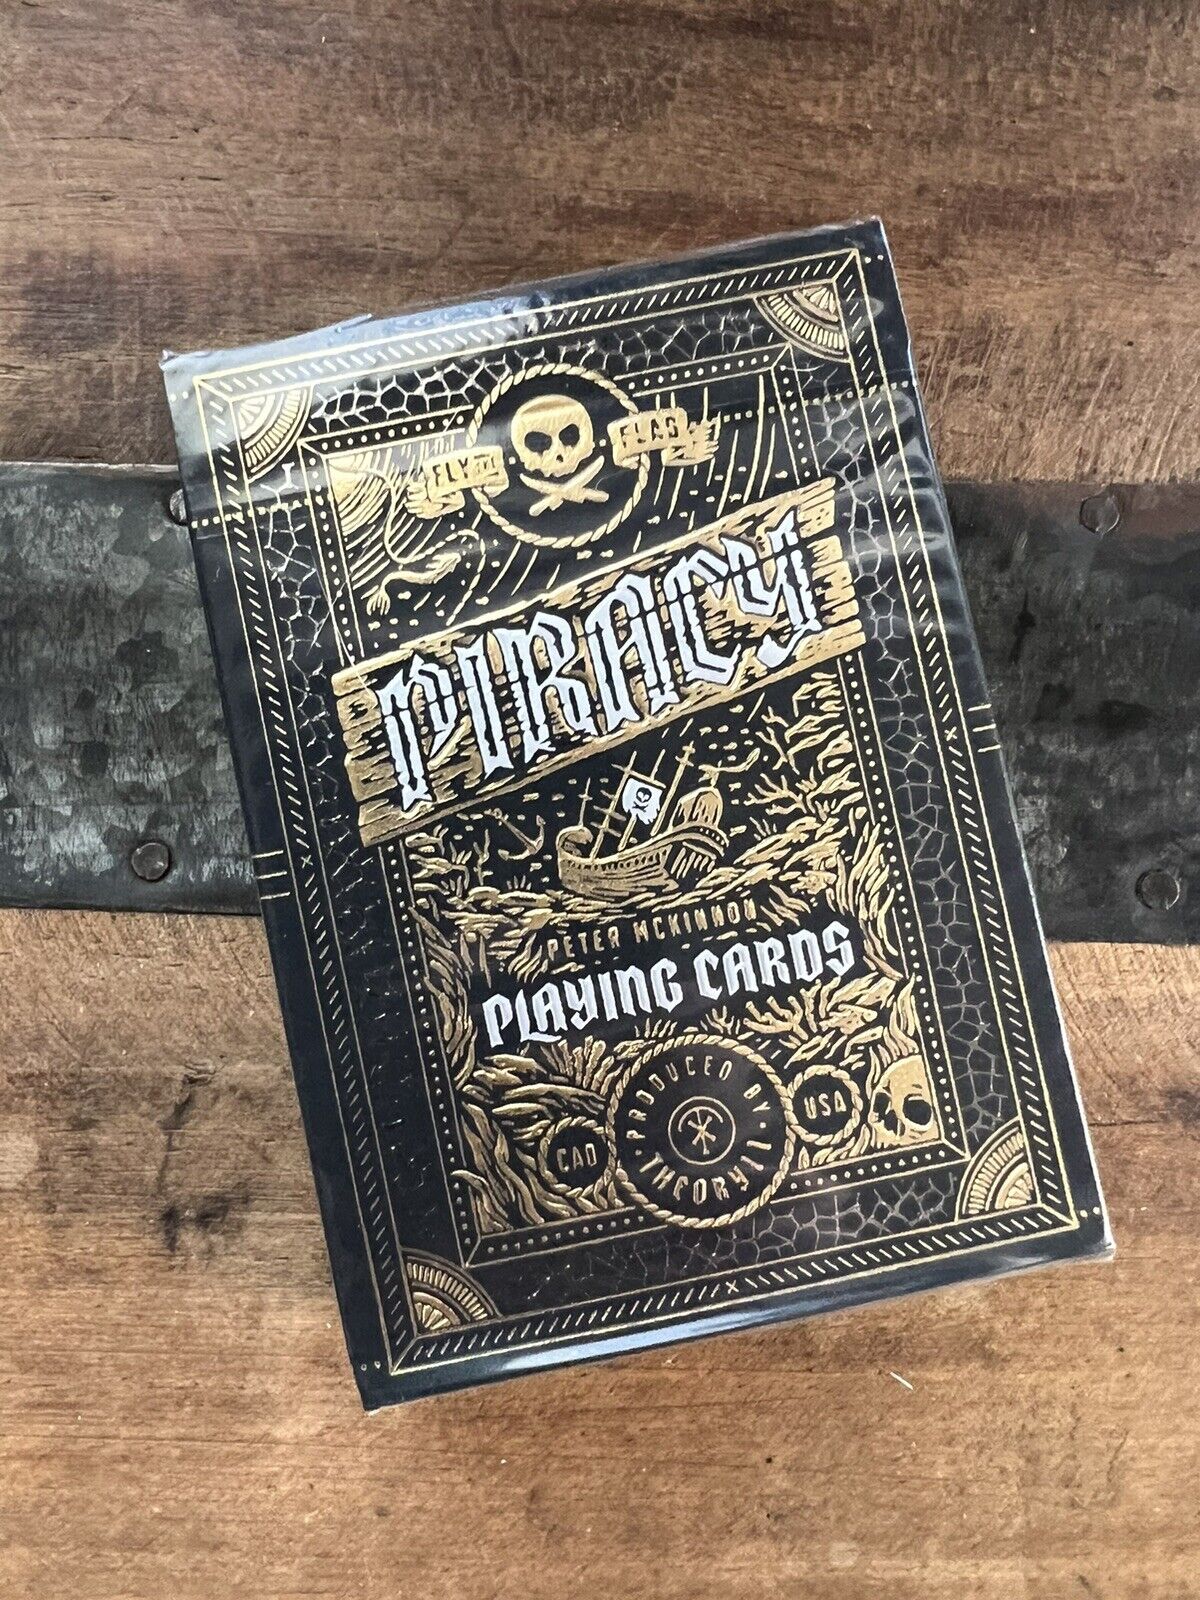 Piracy Playing Cards by theory11 sealed - ships in a box 1️⃣3️⃣